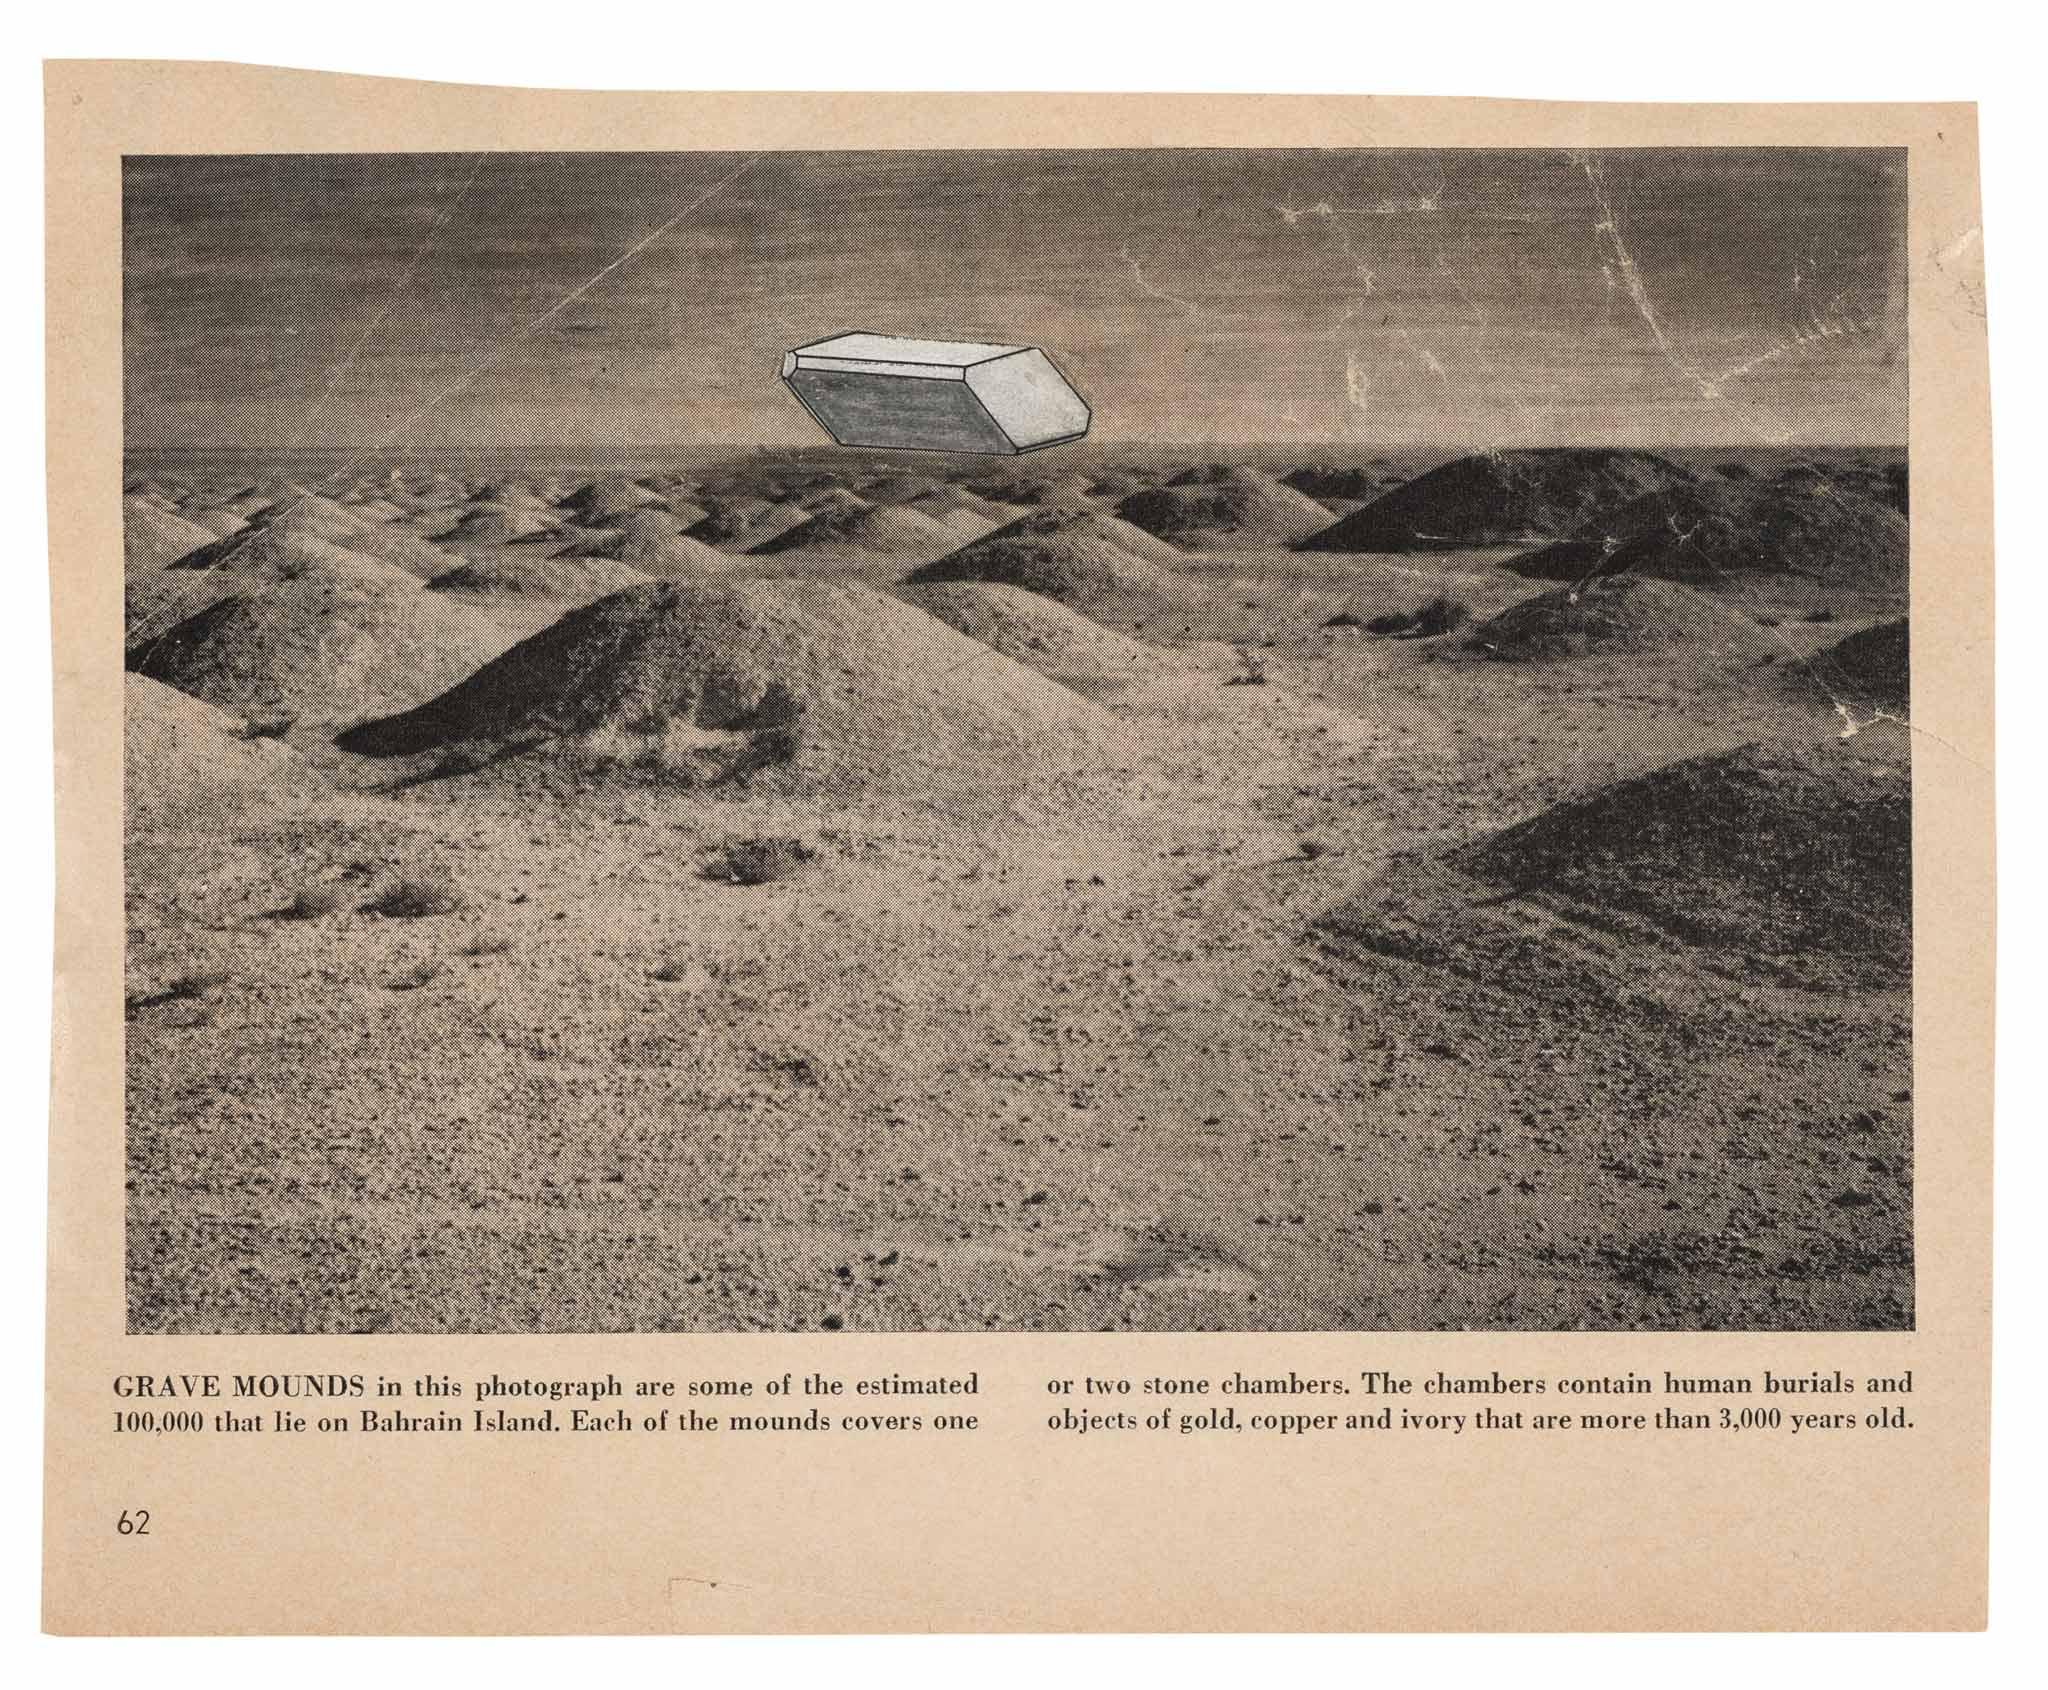 Robert Smithson's photo collage of a crystal object in a landscape of burial mounds